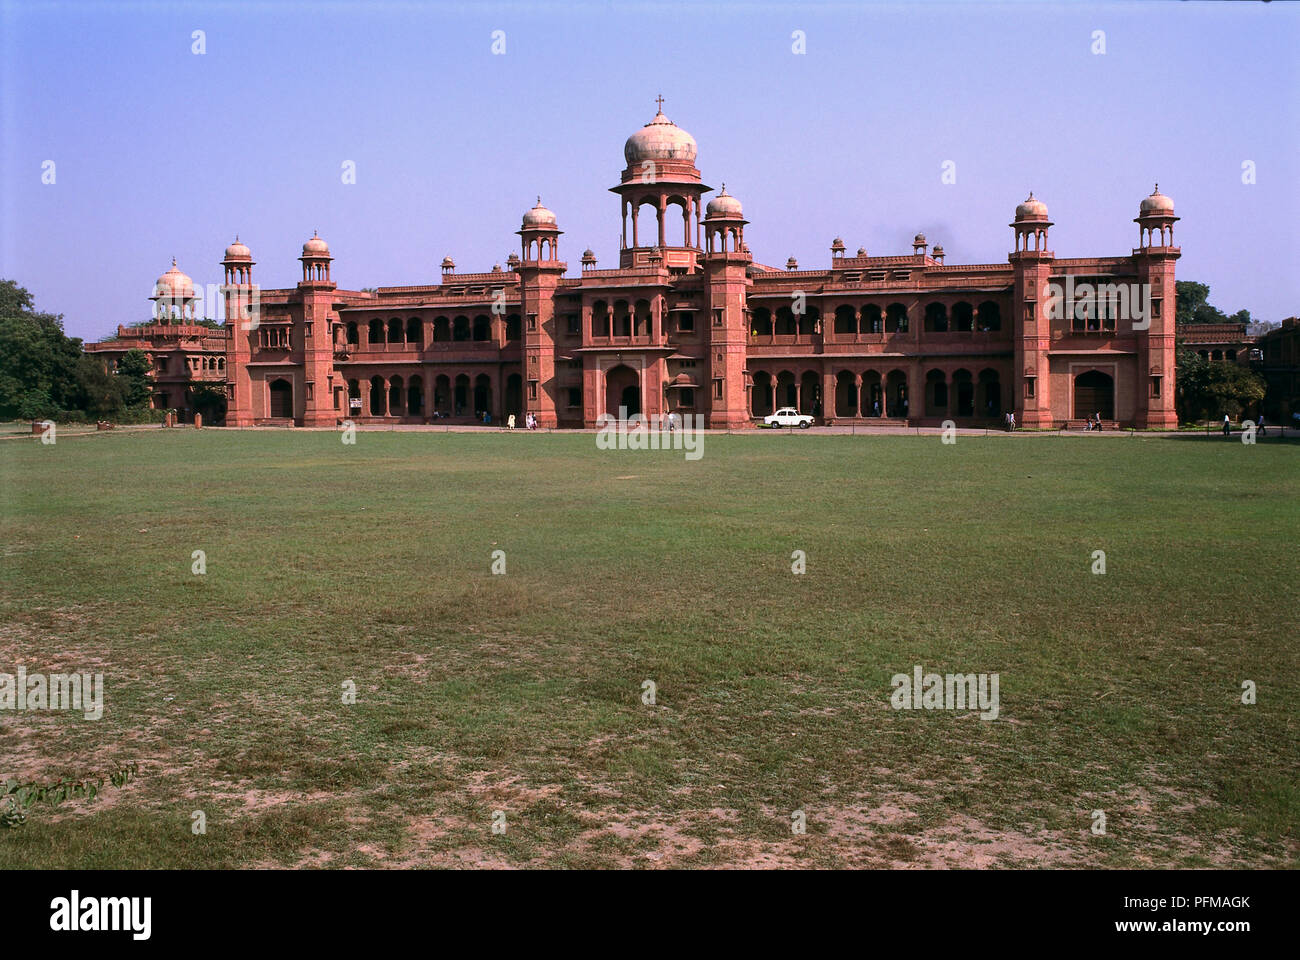 India, Agra, St John's College, red sandstone building with small white domes, cross on central dome, porticoed facade, founded by Church Missionary Society, car parked outside, large lawn in foreground. Stock Photo